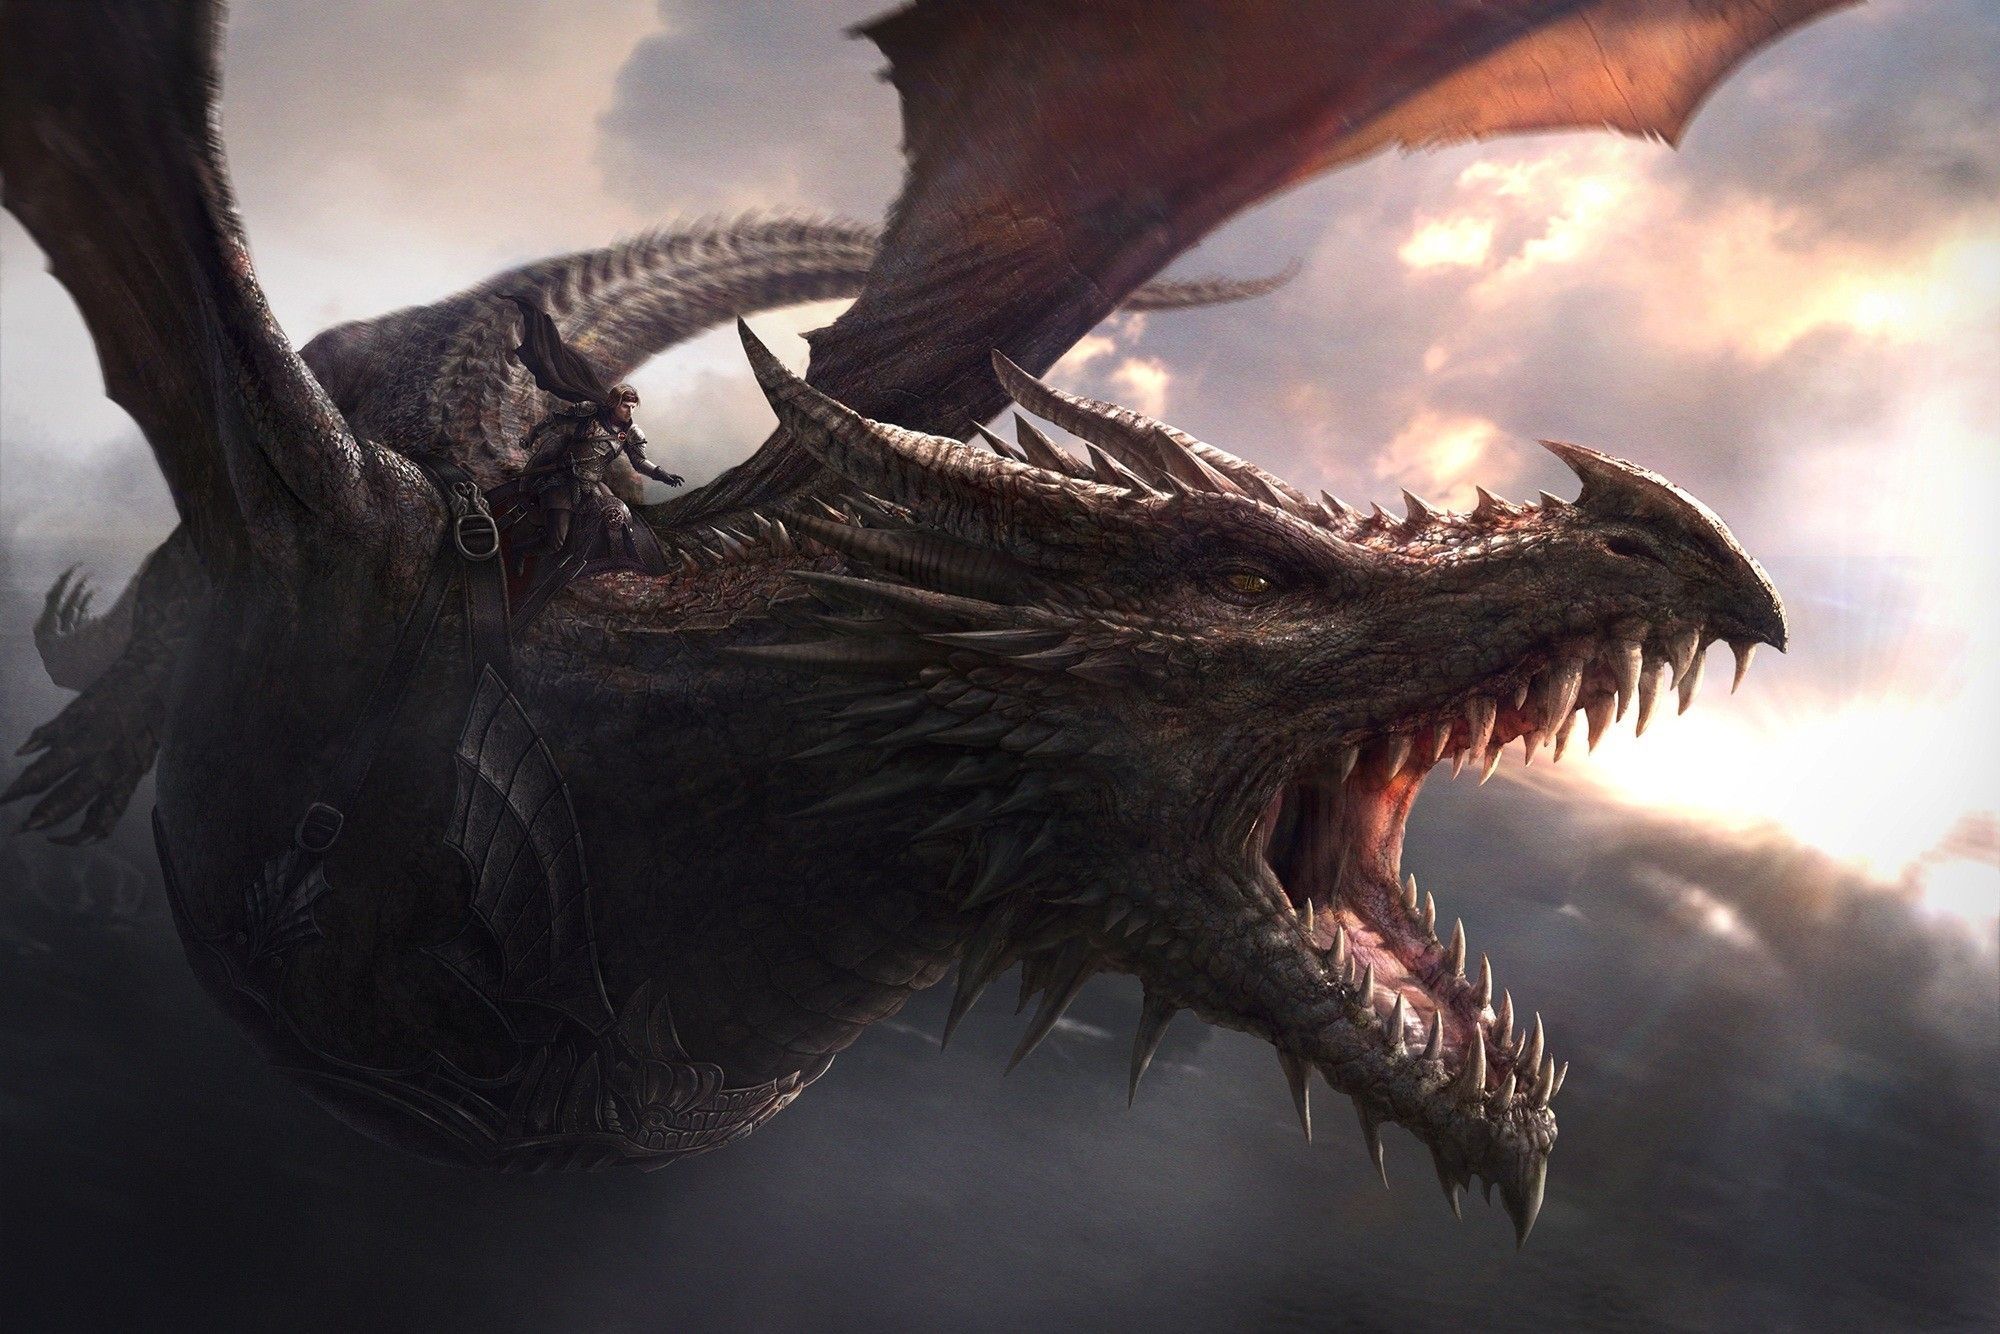 Game of Thrones Dragons Wallpaper Free Game of Thrones Dragons Background. Game of thrones dragons, Balerion the black dread, Dragon games